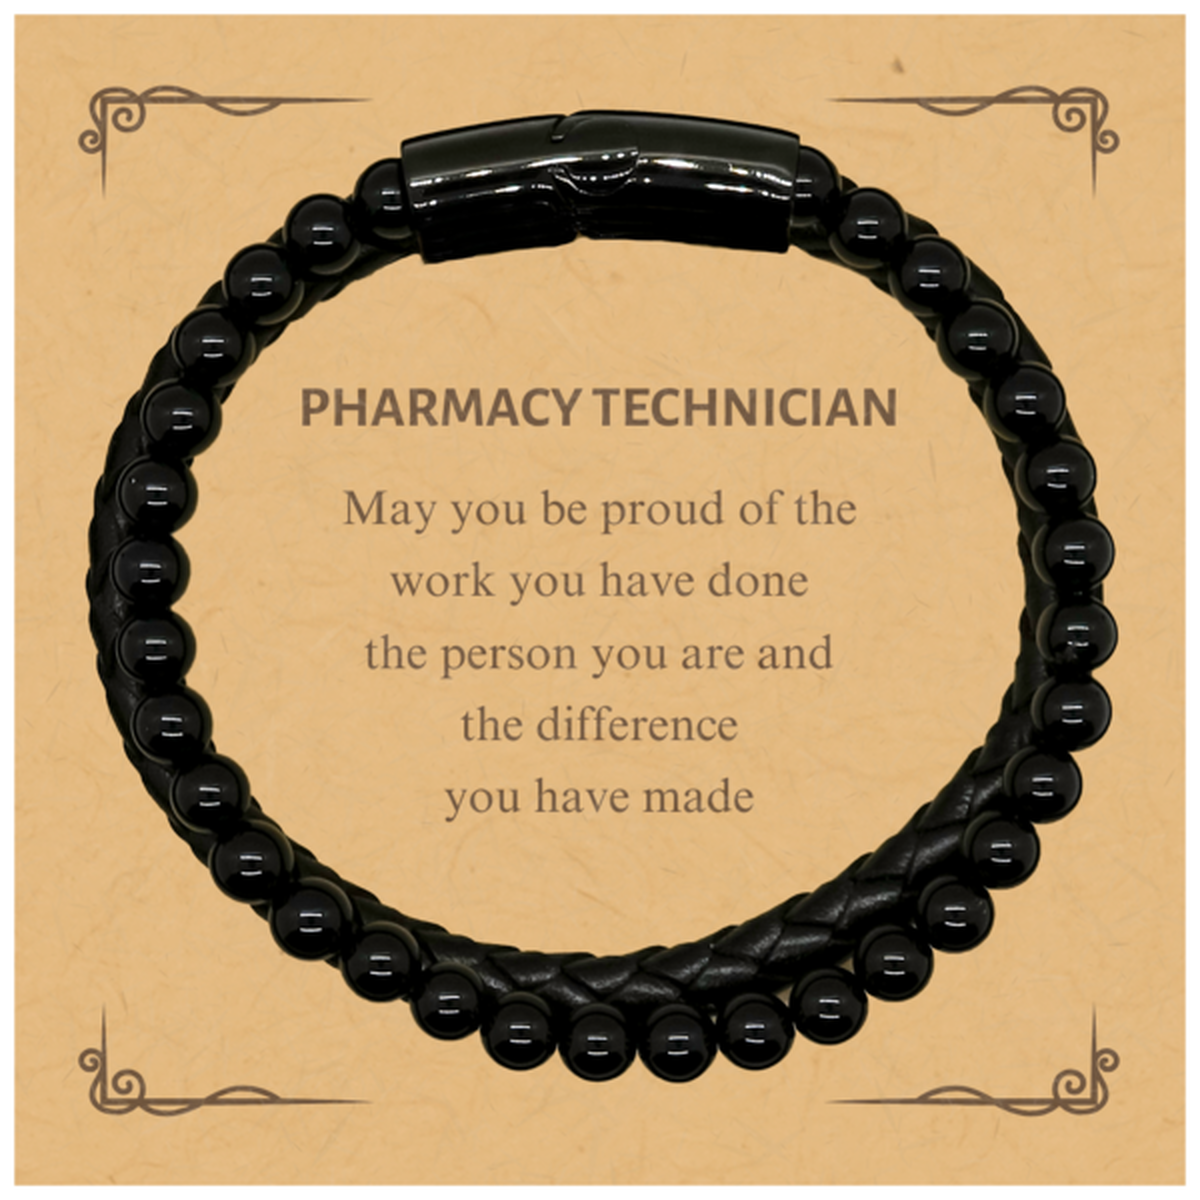 Pharmacy Technician May you be proud of the work you have done, Retirement Pharmacy Technician Stone Leather Bracelets for Colleague Appreciation Gifts Amazing for Pharmacy Technician